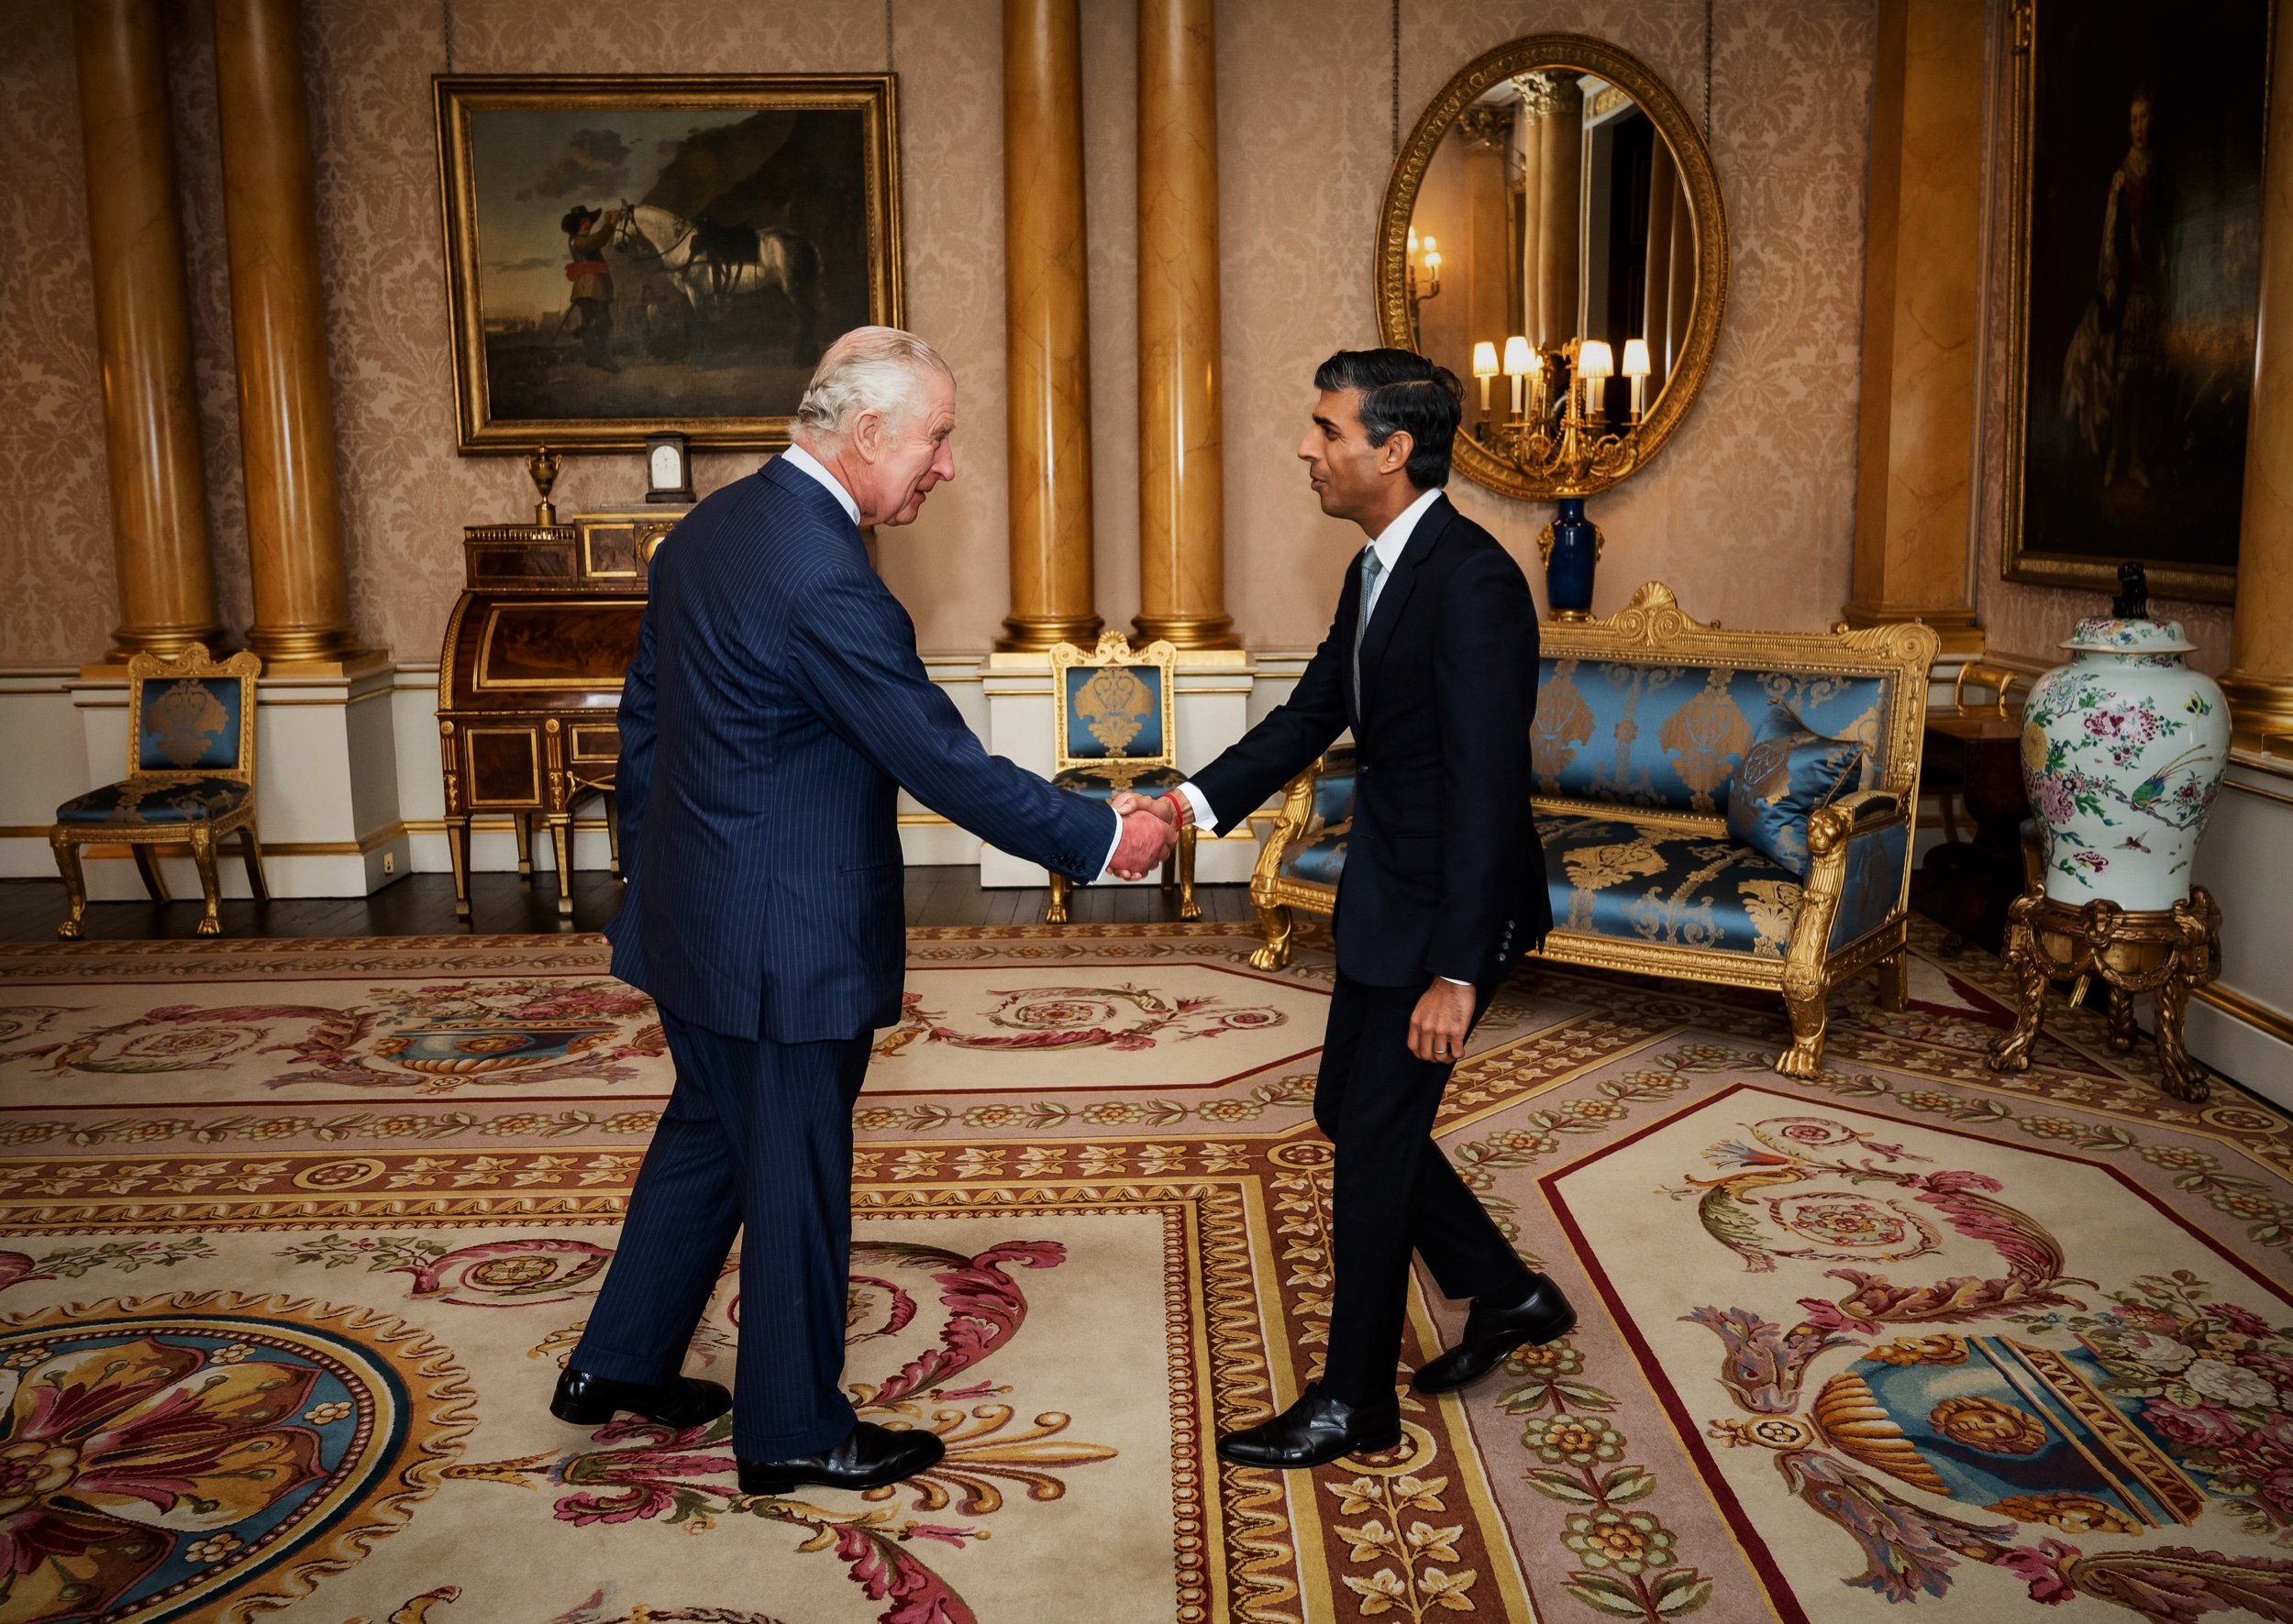  King Charles III welcomes Rishi Sunak during an audience at Buckingham Palace, London, where he invited the newly elected leader of the Conservative Party to become Prime Minister and form a new government. Picture date: Tuesday October 25, 2022. Ph